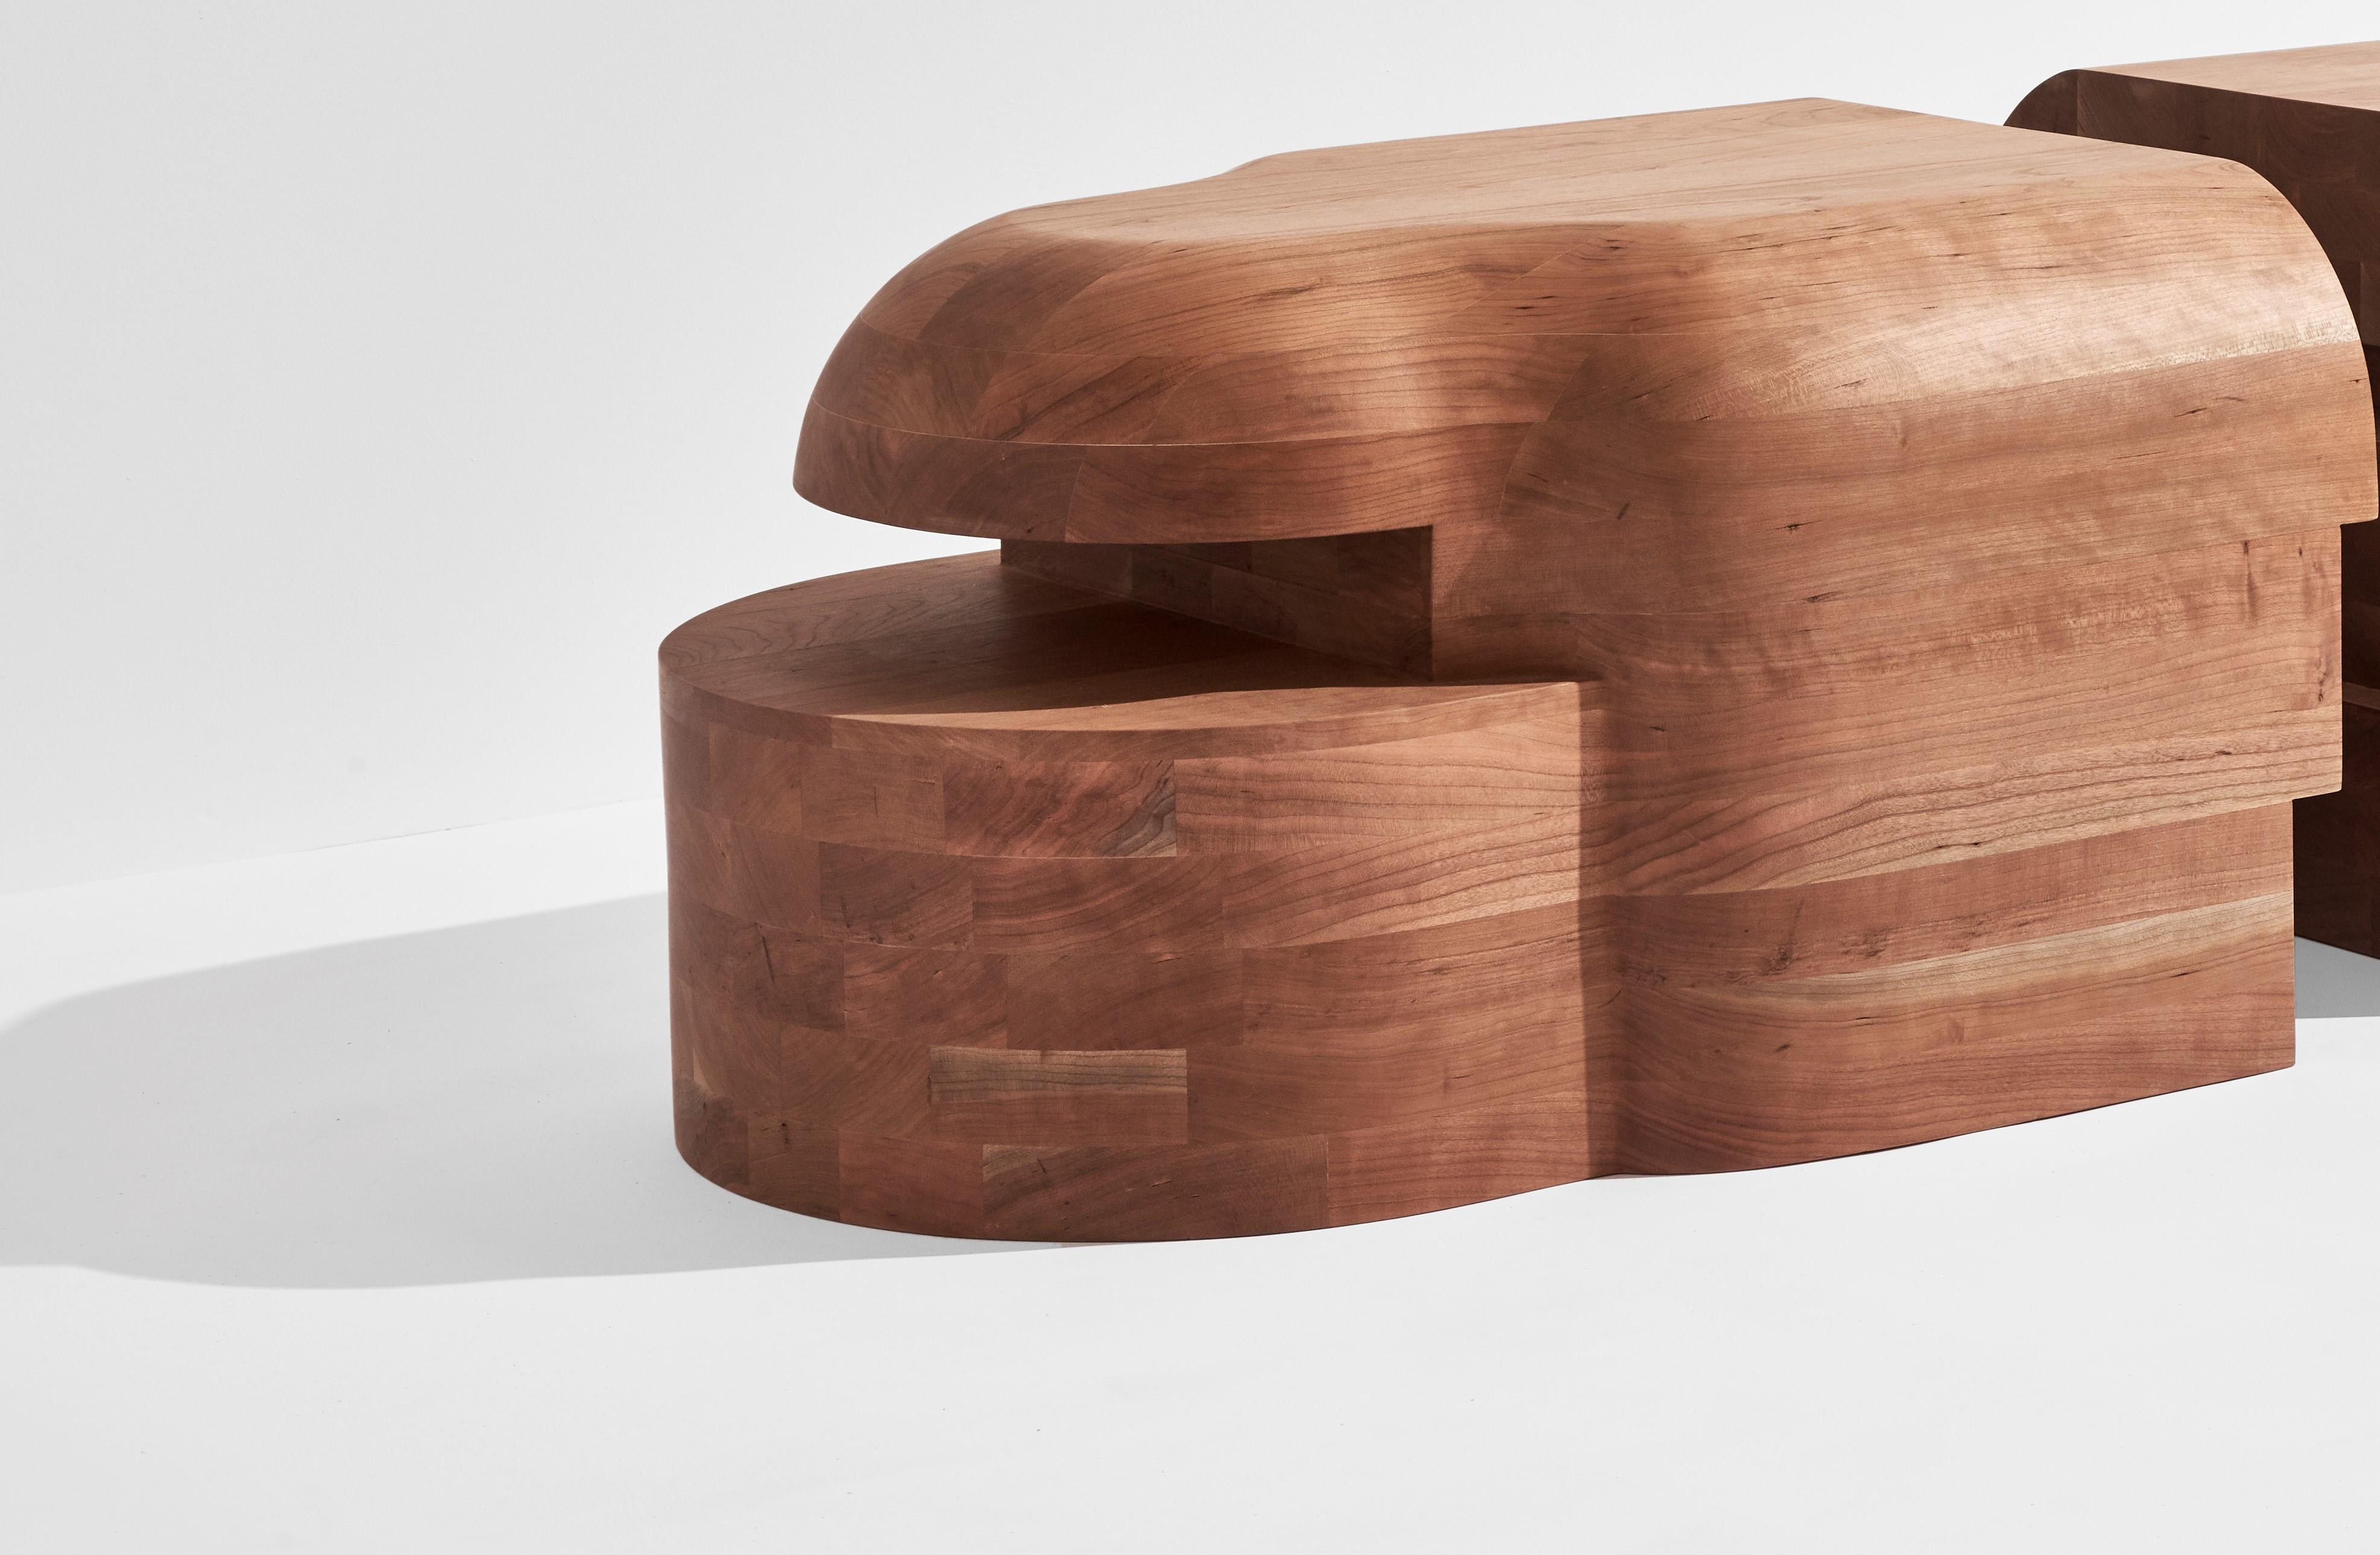 Lhamu X stool by Sizar Alexis
Limited edition of 10 Pieces
Dimensions: L 80 x W 60 x H 45 cm
Materials: American cherry 

Lahmu when me and my wife got home from the maternity ward in april 2020, we made sure that we were protected from the